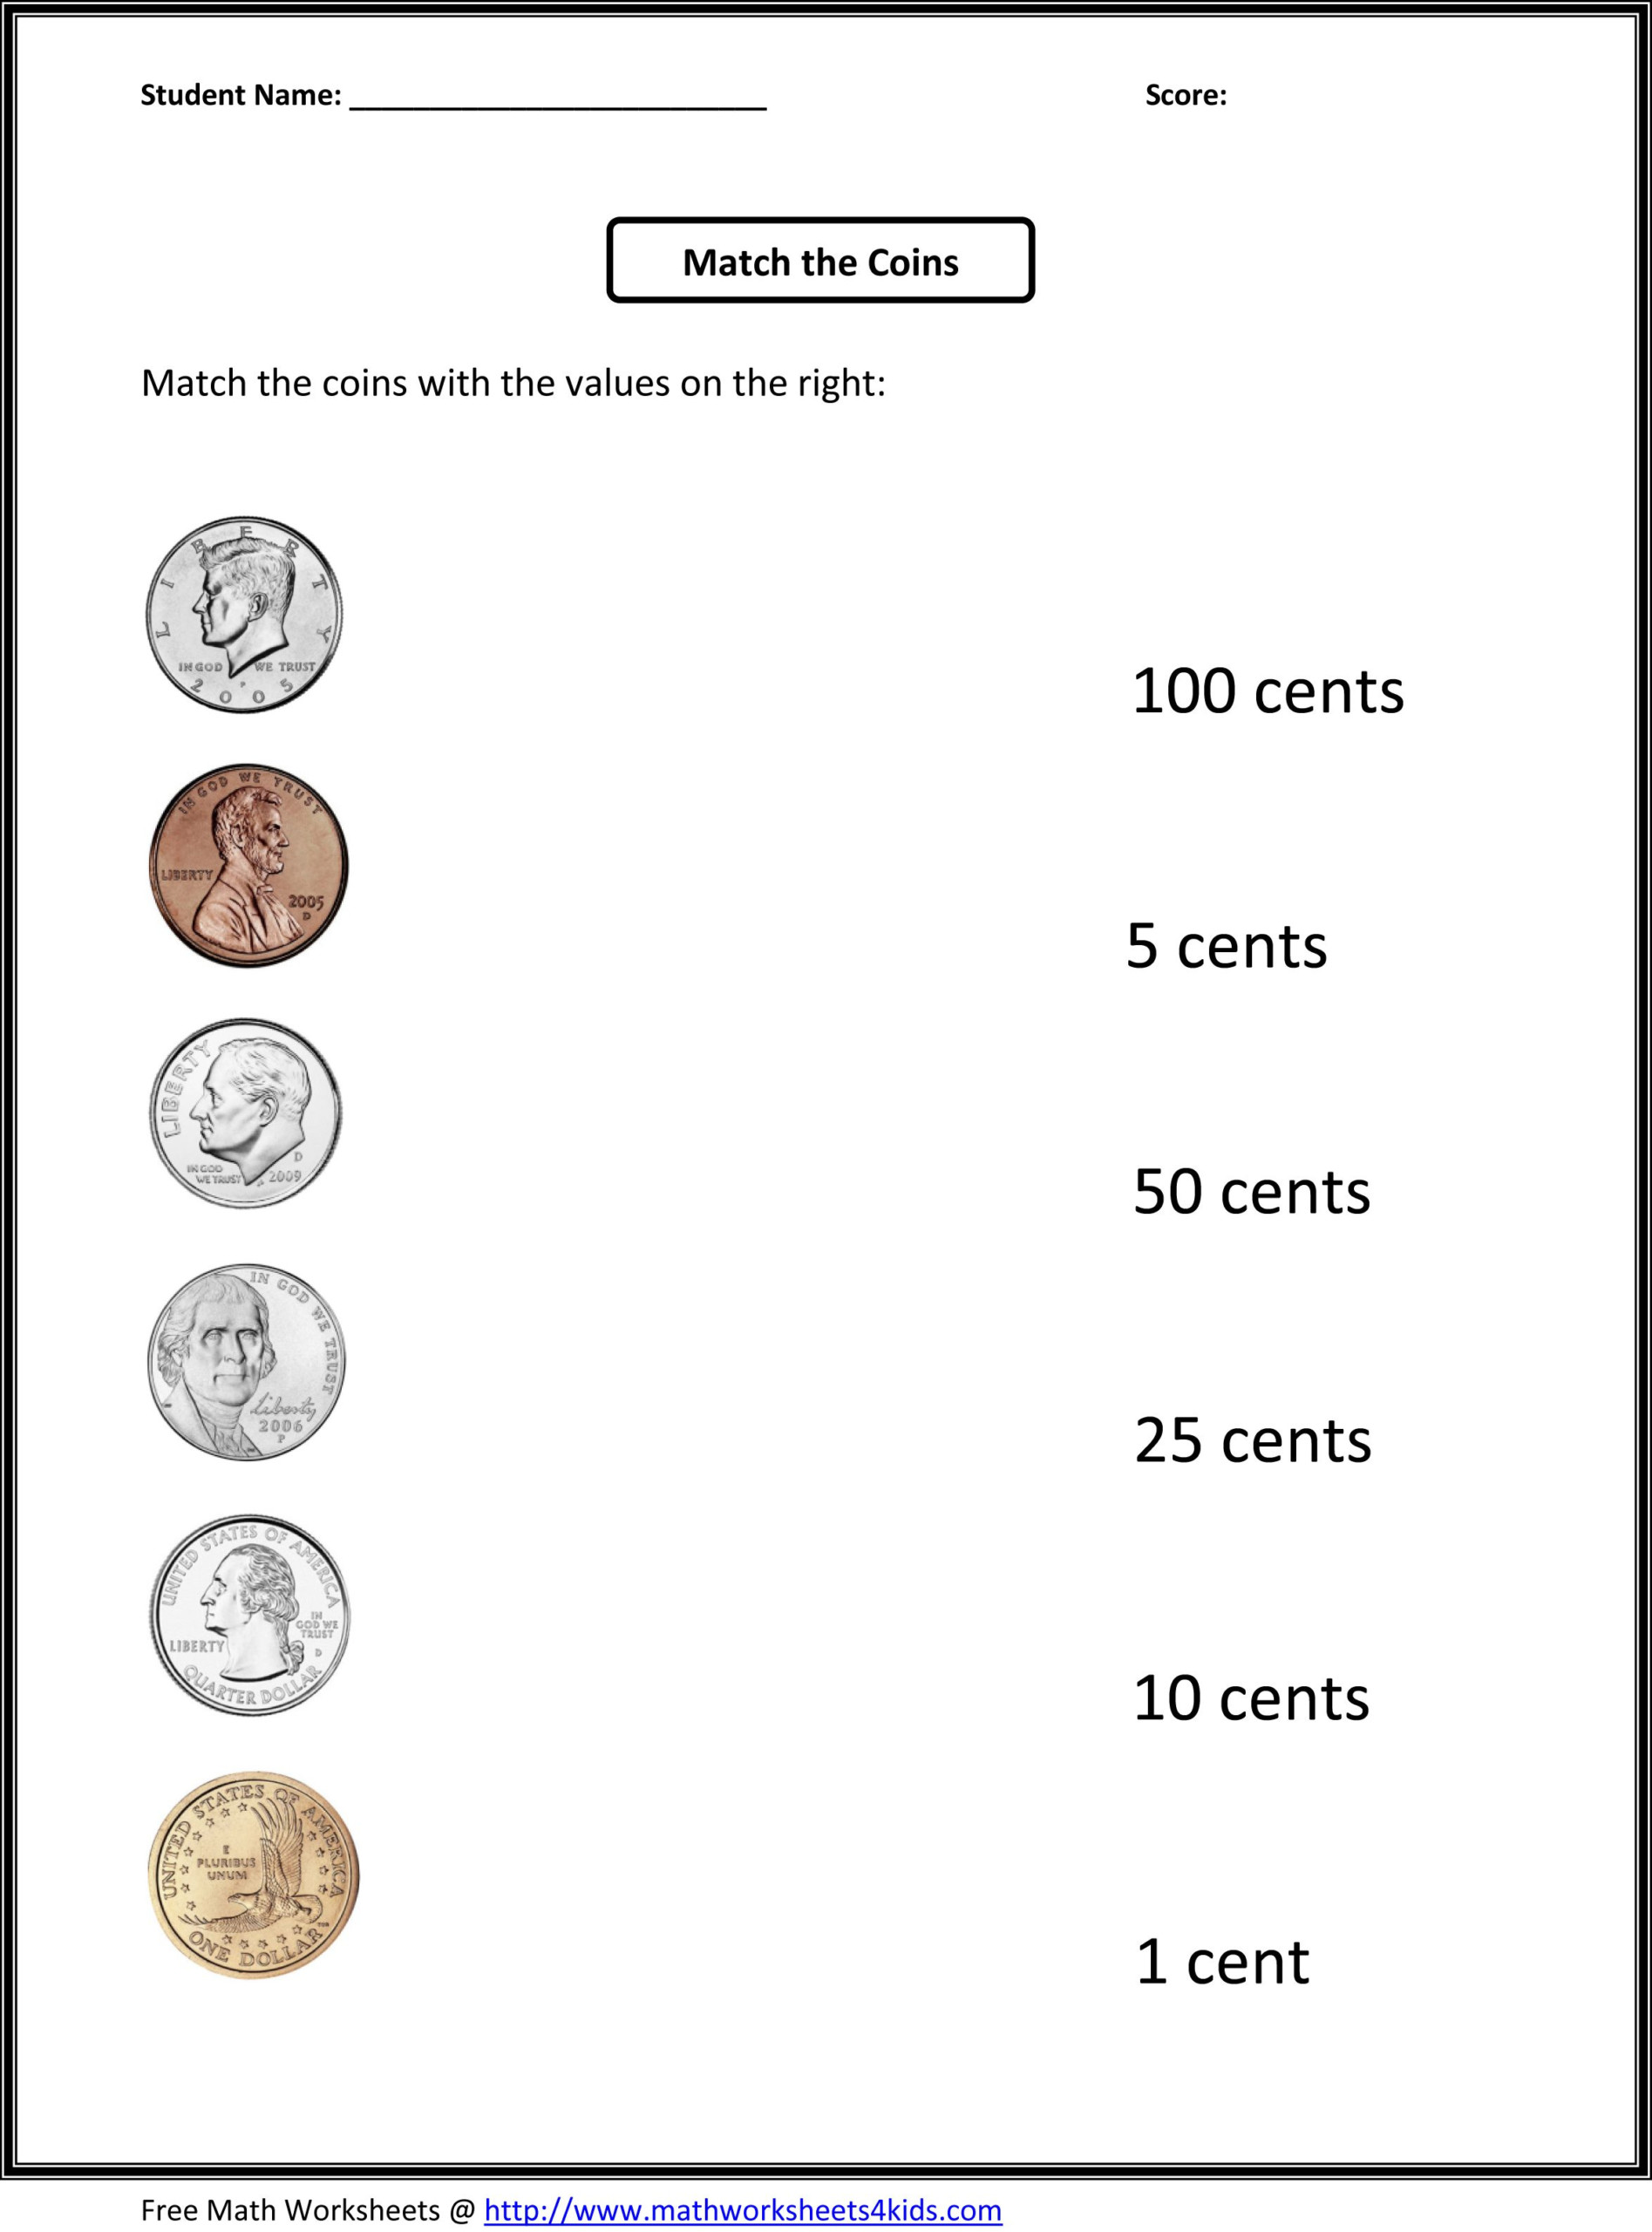 30 Identifying Coins And Coin Values Worksheets 